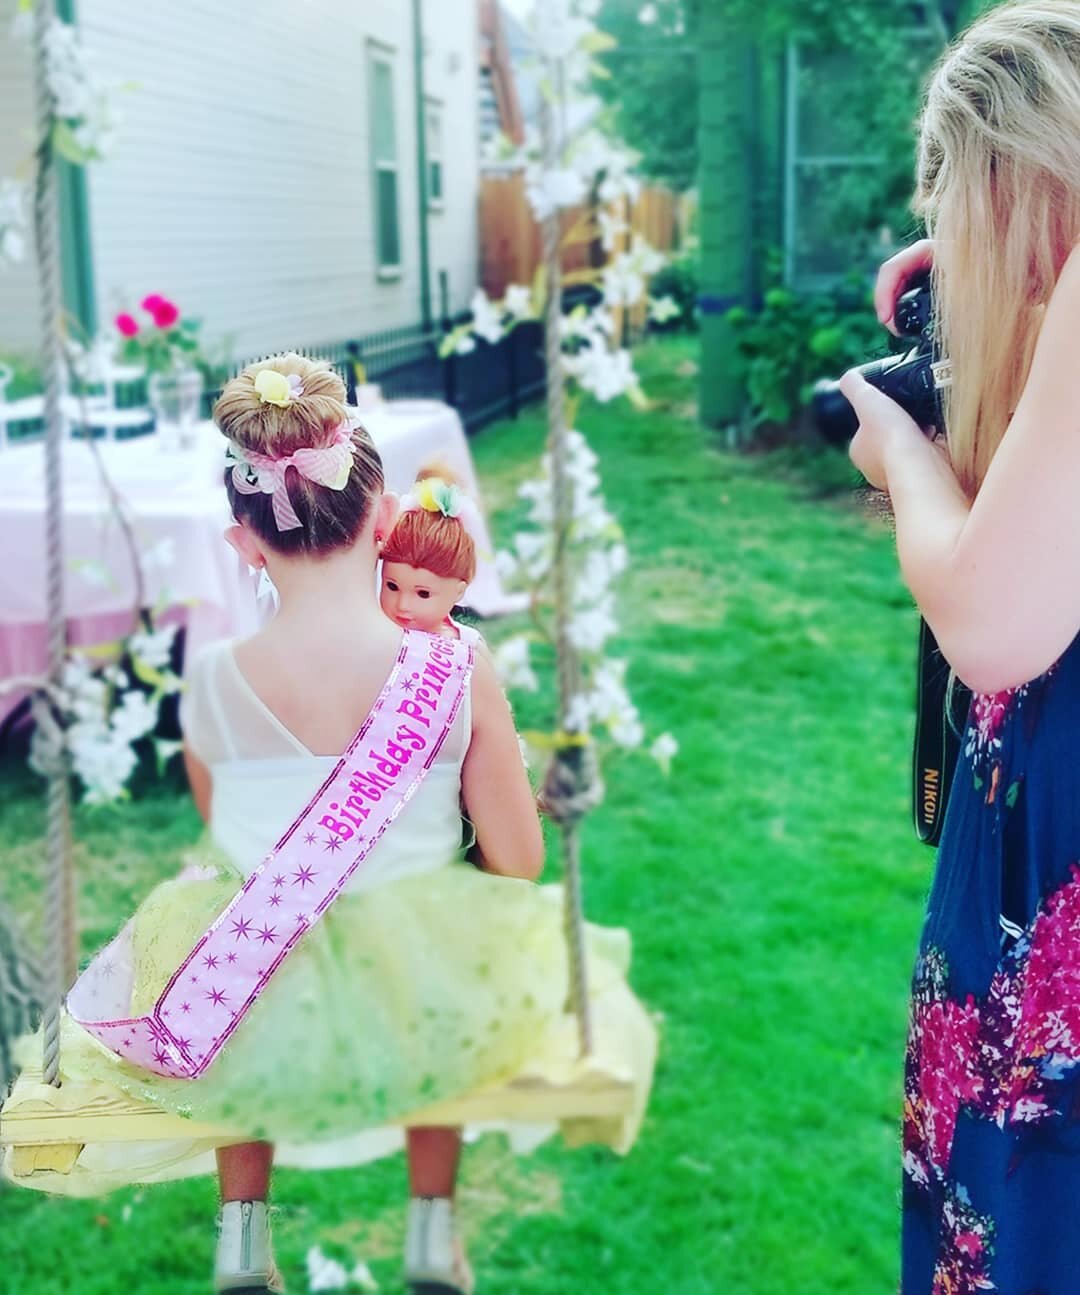 Princess Parties are back!🤗👸🏼
We cant wait to see the professional photos taken by @dfaith.photography
Did your princess miss her party during quarantine?Princess Tea parties are the perfect way to make it up to her!
Fall reservations are still av